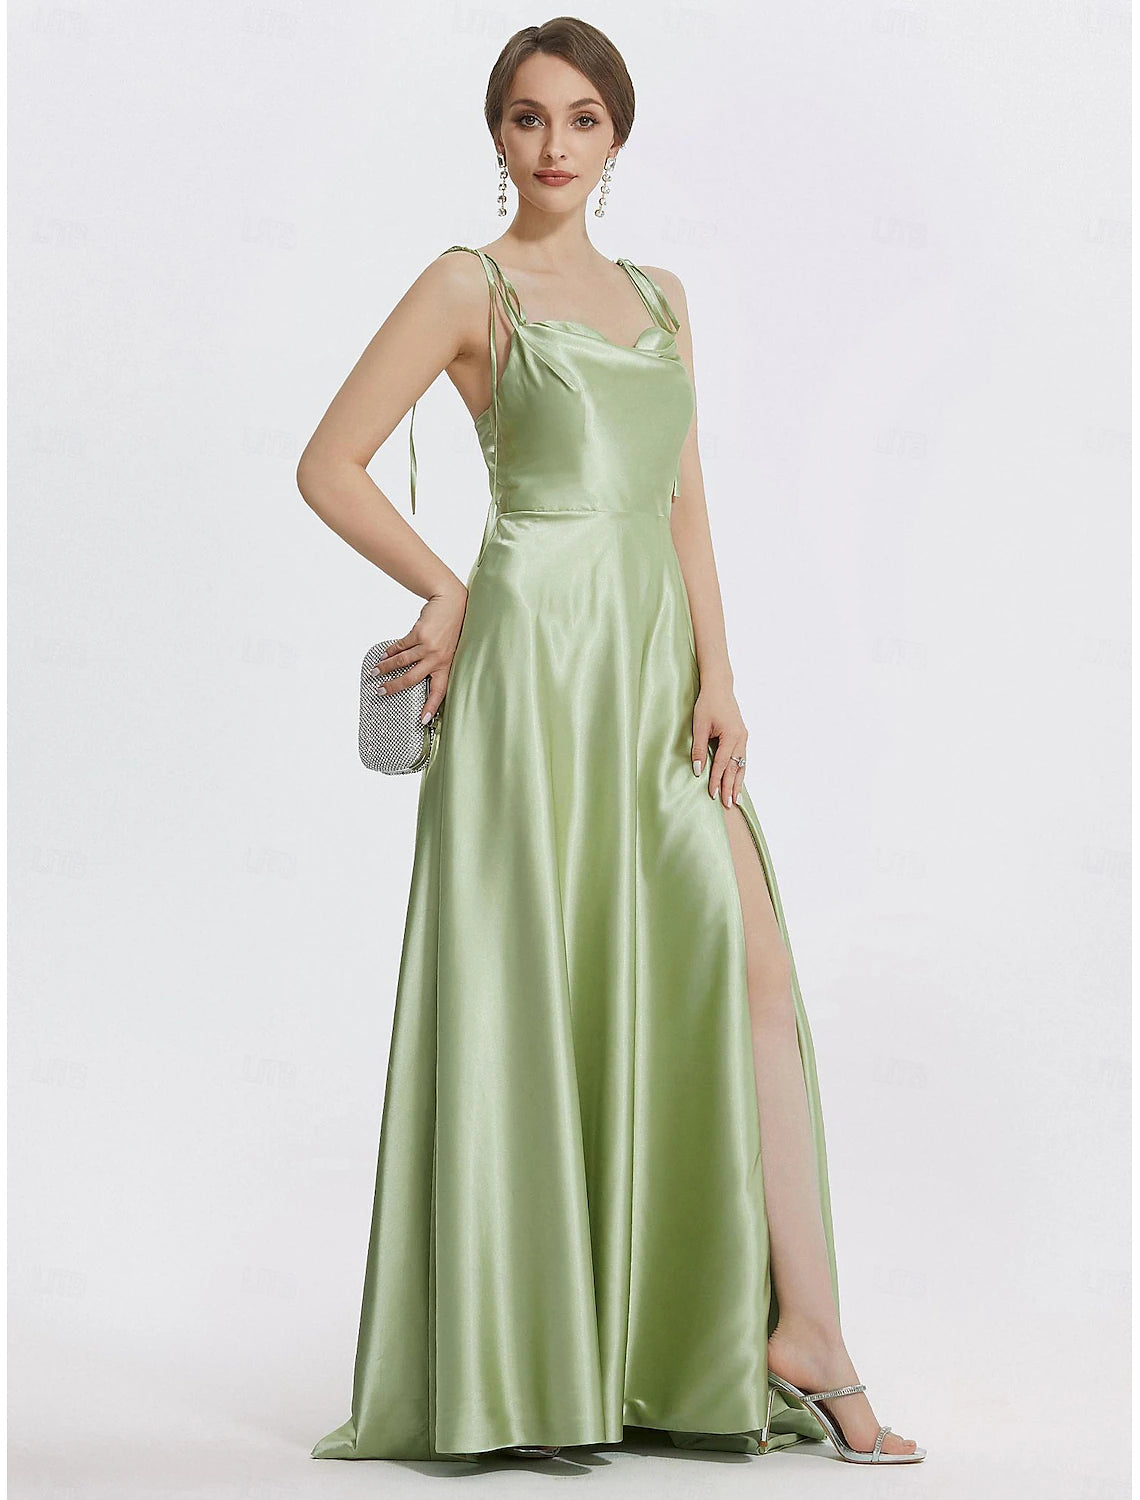 A-Line Evening Gown Elegant Dress Formal Prom Floor Length Sleeveless Spaghetti Strap Satin with Ruched Slit Strappy